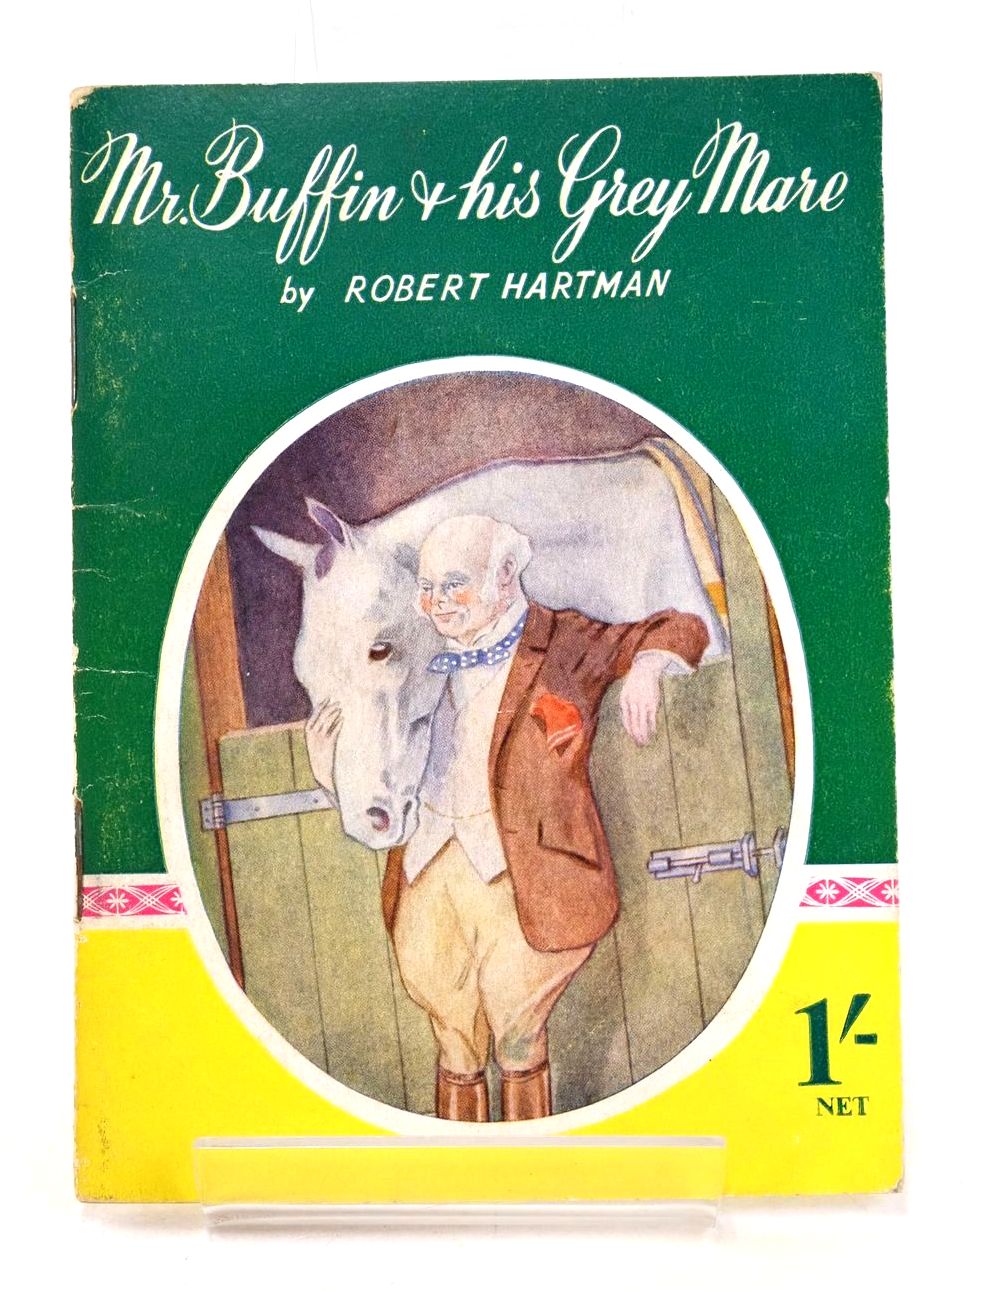 Photo of MR. BUFFIN AND HIS GREY MARE written by Hartman, Robert illustrated by Hartman, Robert published by Arthur Barker Ltd. (STOCK CODE: 1327739)  for sale by Stella & Rose's Books